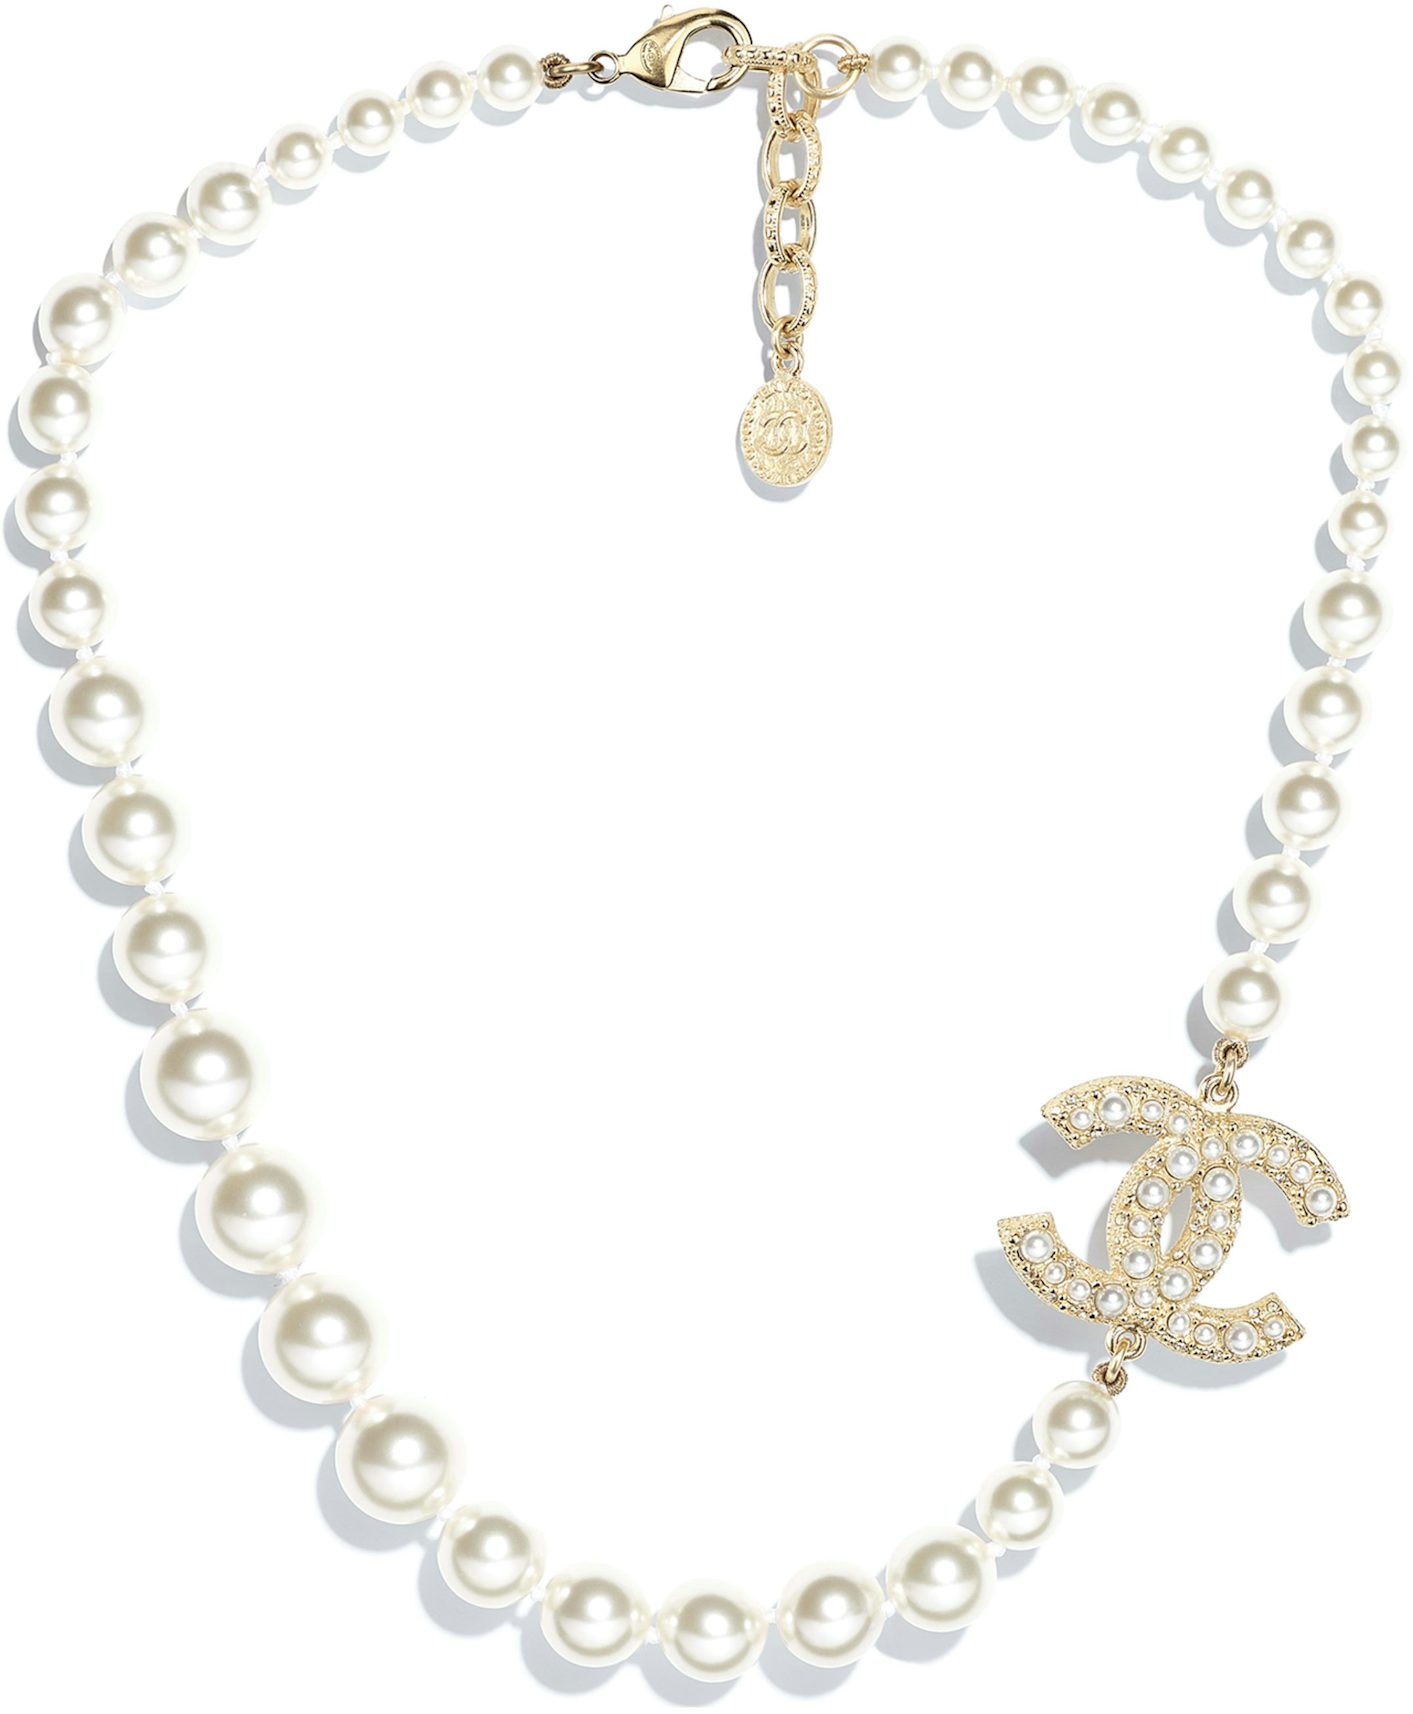 Cc necklace Chanel White in Metal - 33276898